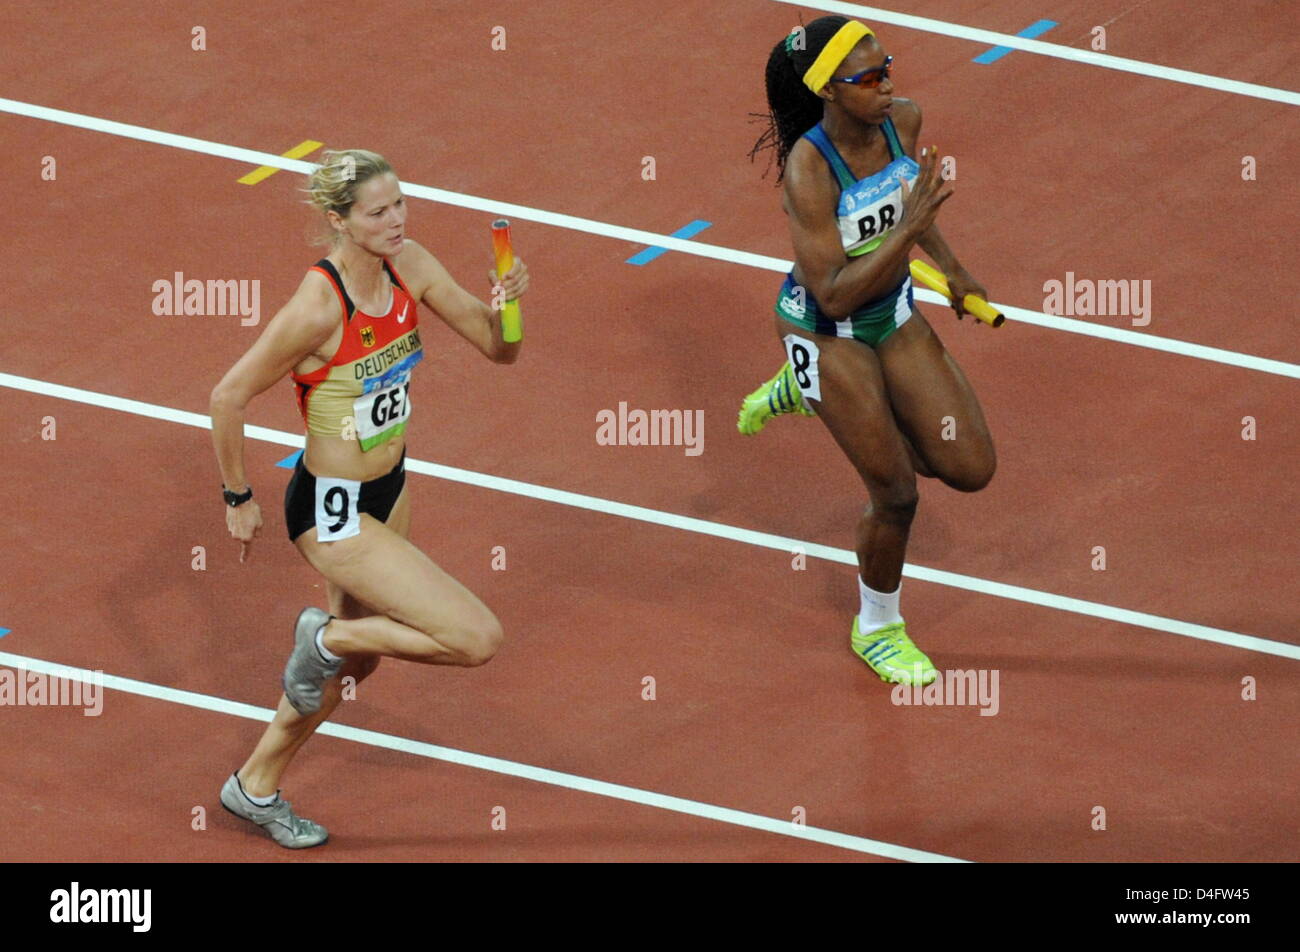 German Marion Wagner competes against Rosangela Santos of Brazil (R) in Women's 4 x 100m Relay Final during the Beijing 2008 Olympic Games in the National Stadium in Beijing, China, 22 August 2008. Photo: Bernd Thissen dpa ###dpa### Stock Photo